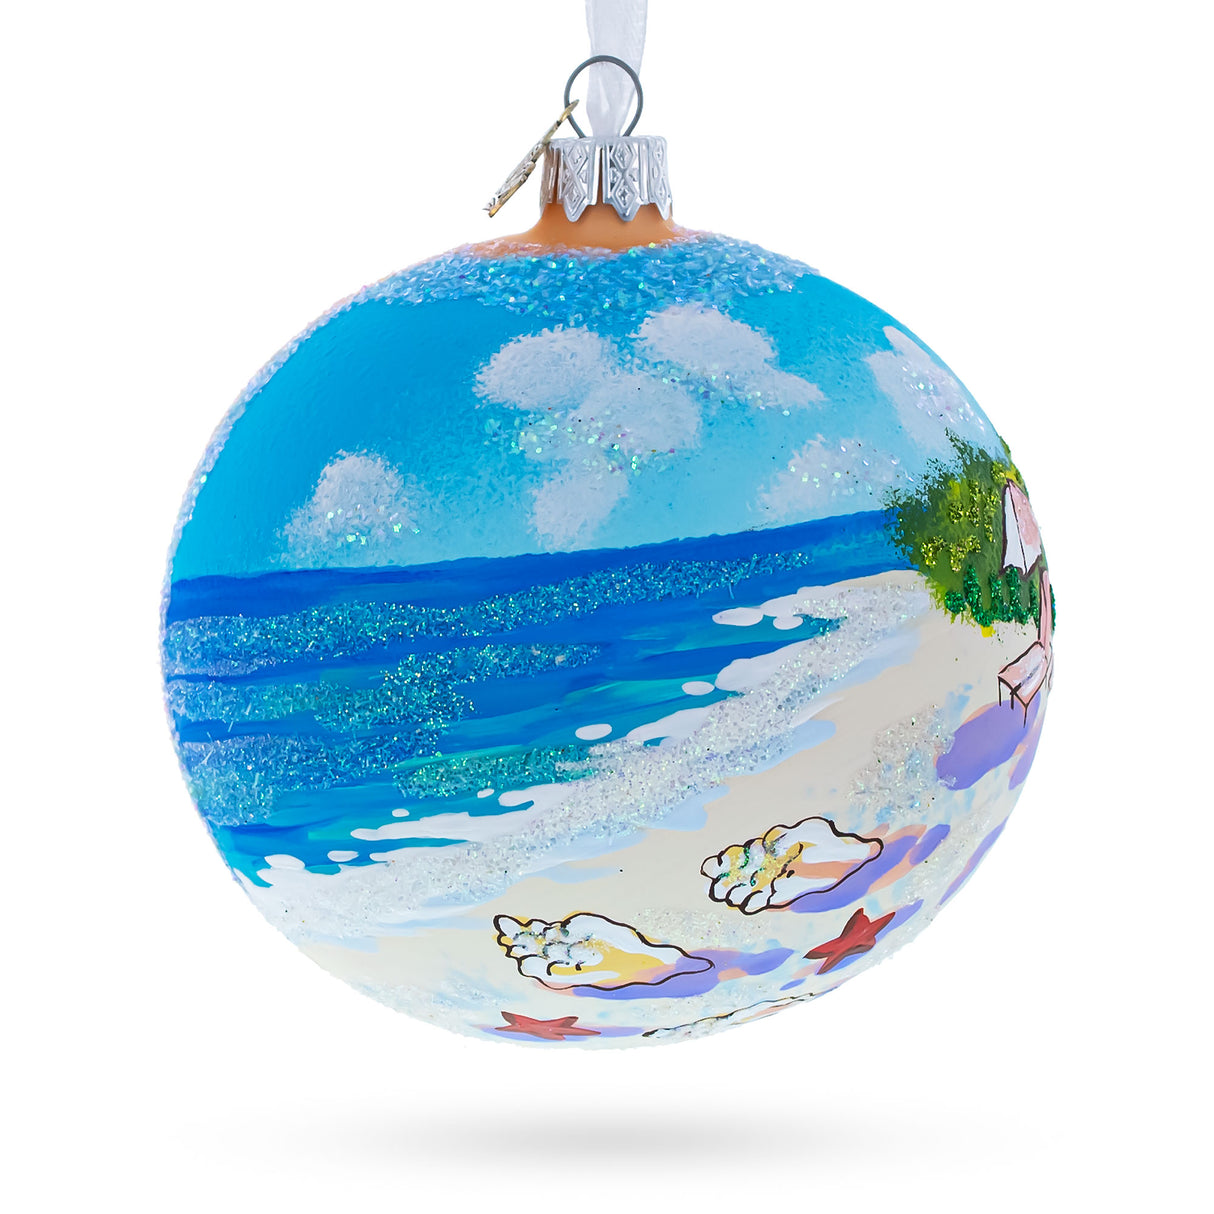 Turks and Caicos Glass Ball Christmas Ornament 4 Inches in Multi color, Round shape